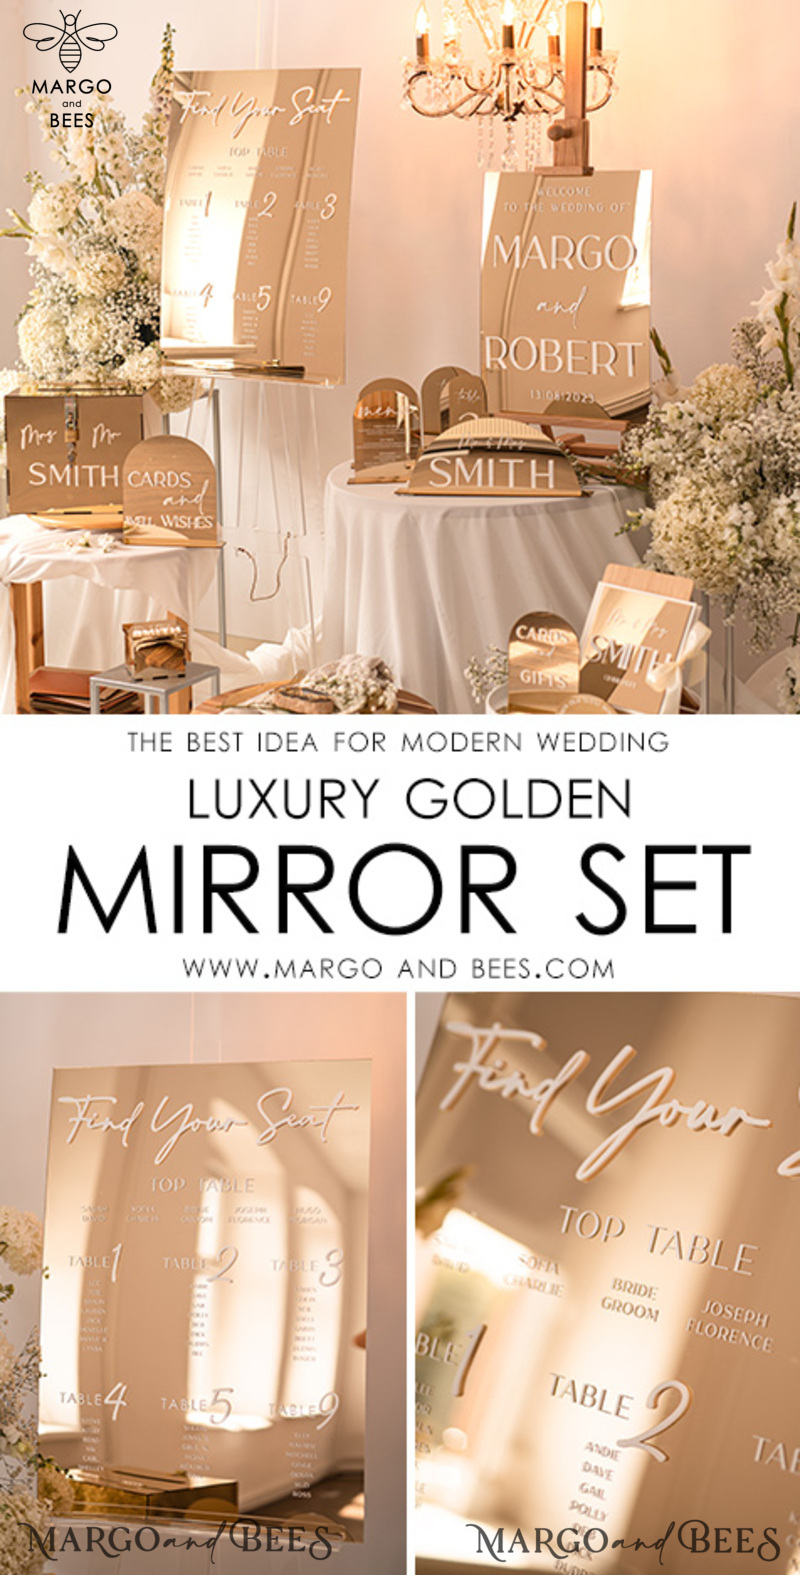 Gold Mirror Seating Chart Sign, 3d Elegant Find Your Seat - Seating Plan, Luxury Wedding Table Plan, Mirror Wedding Decoration - Golden Reception Signage - Custom Ceremony Sign-4